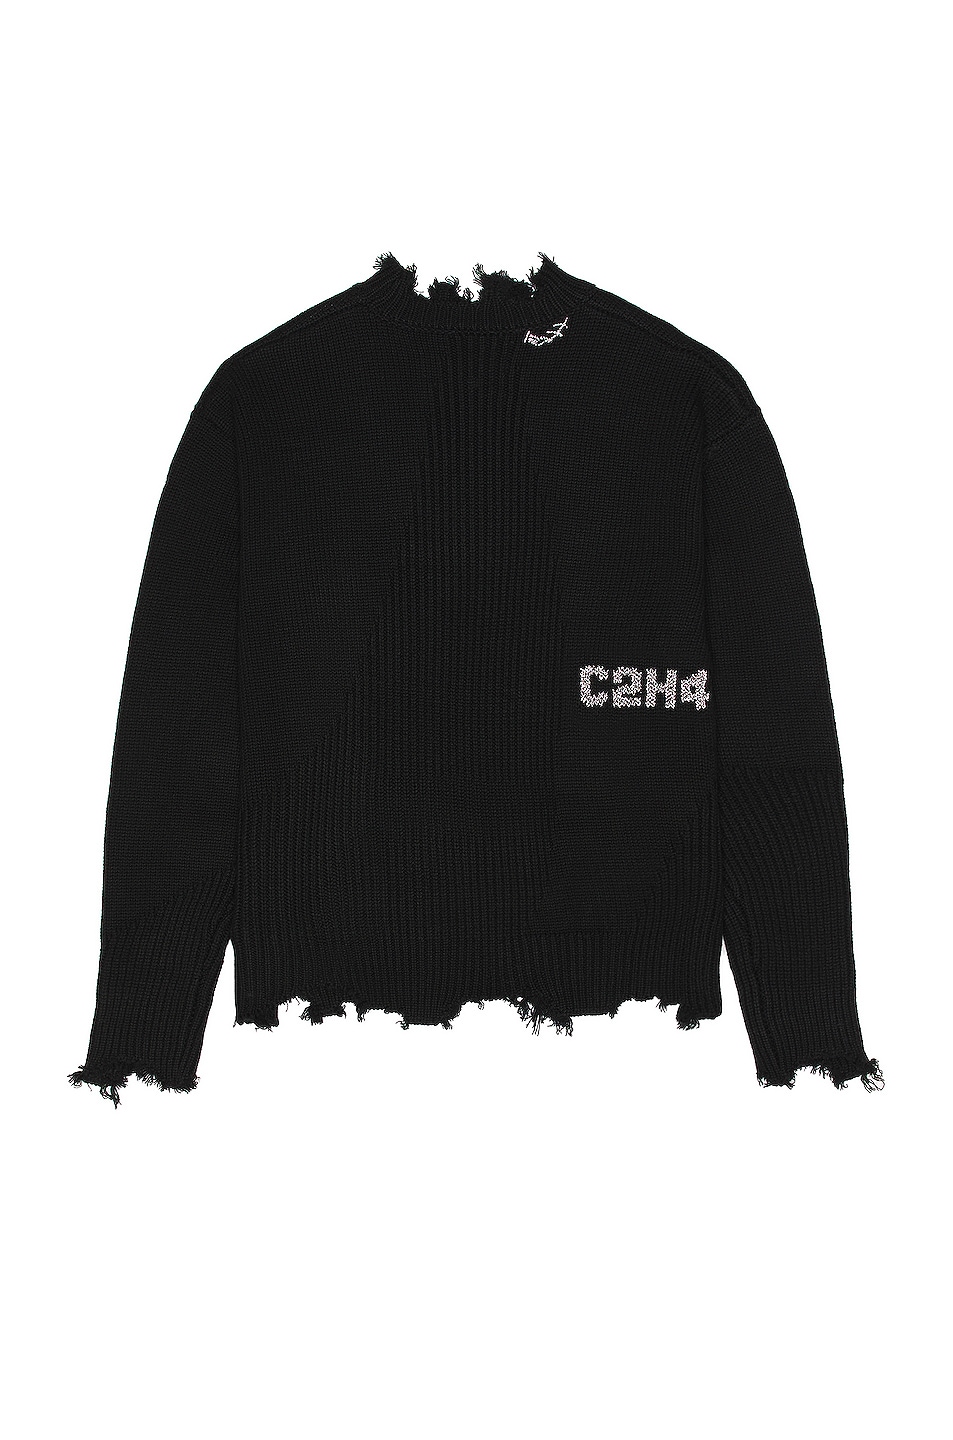 Image 1 of C2H4 Arc Sculpture Knit Sweater in Black